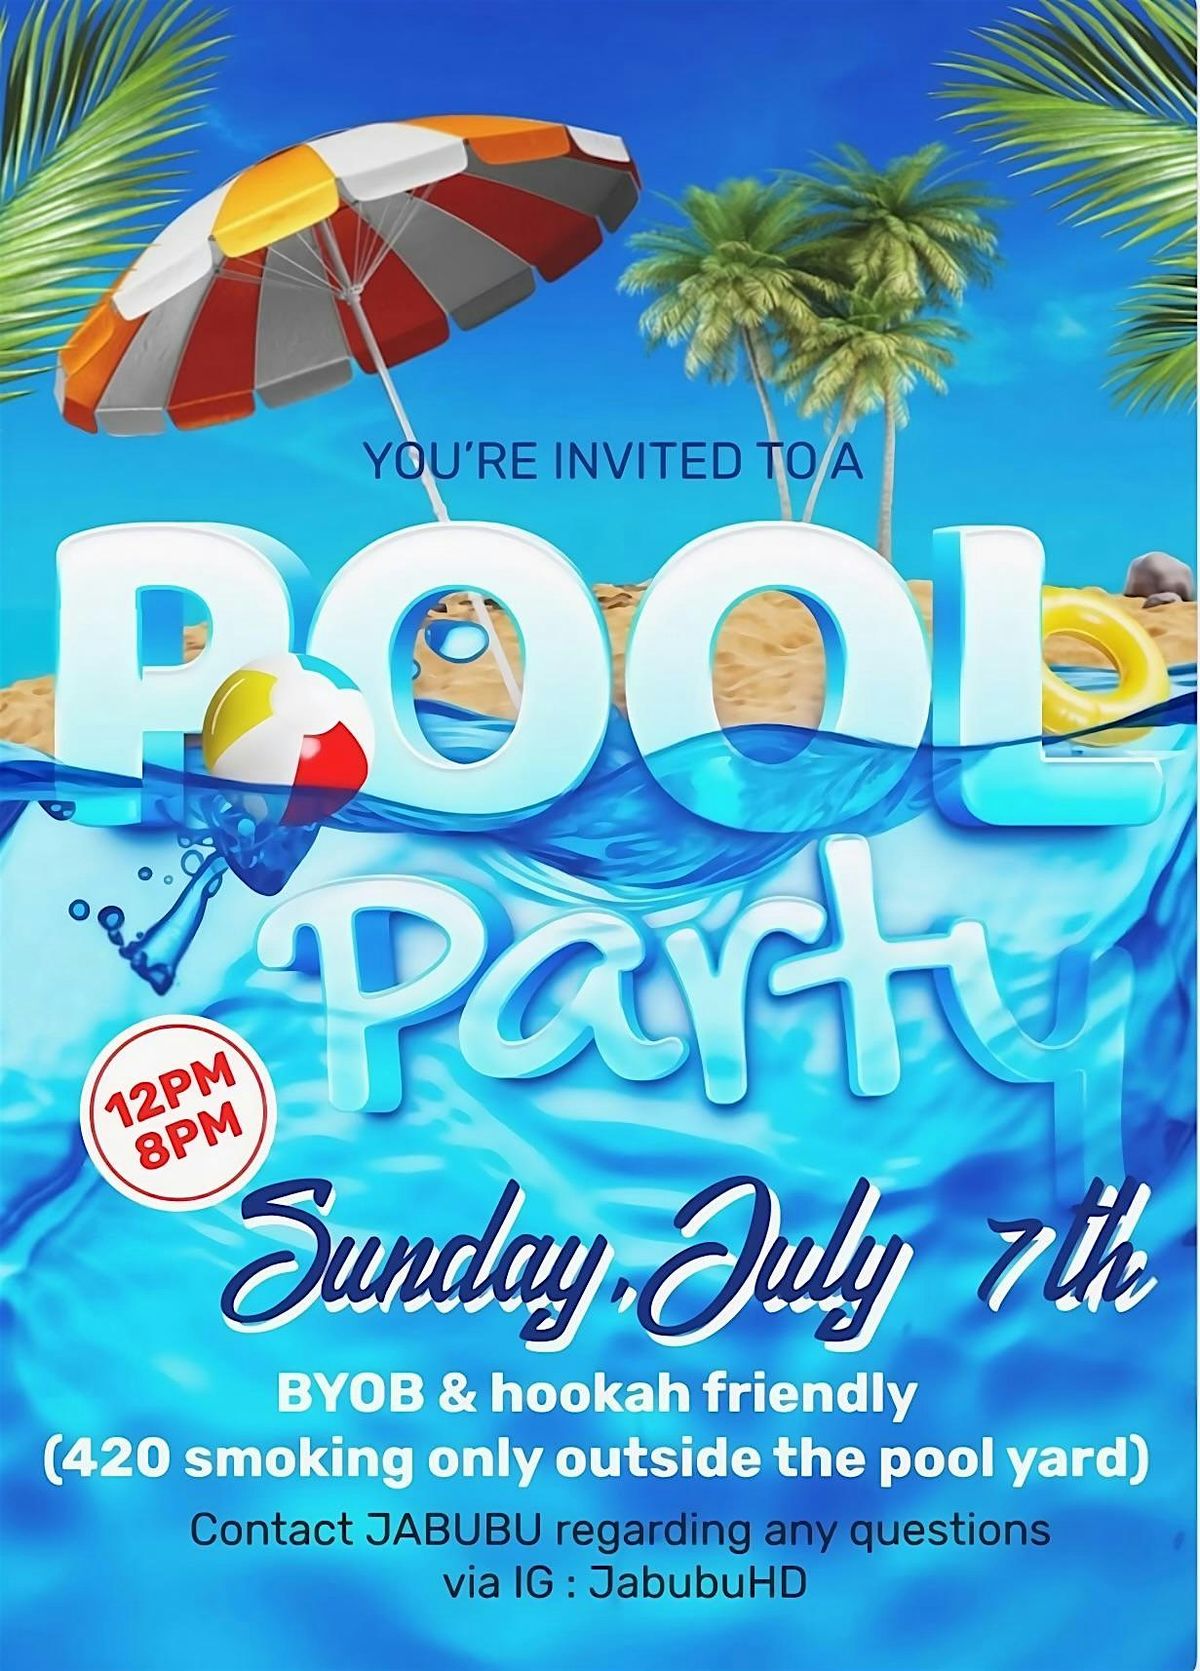 Pool party cookout